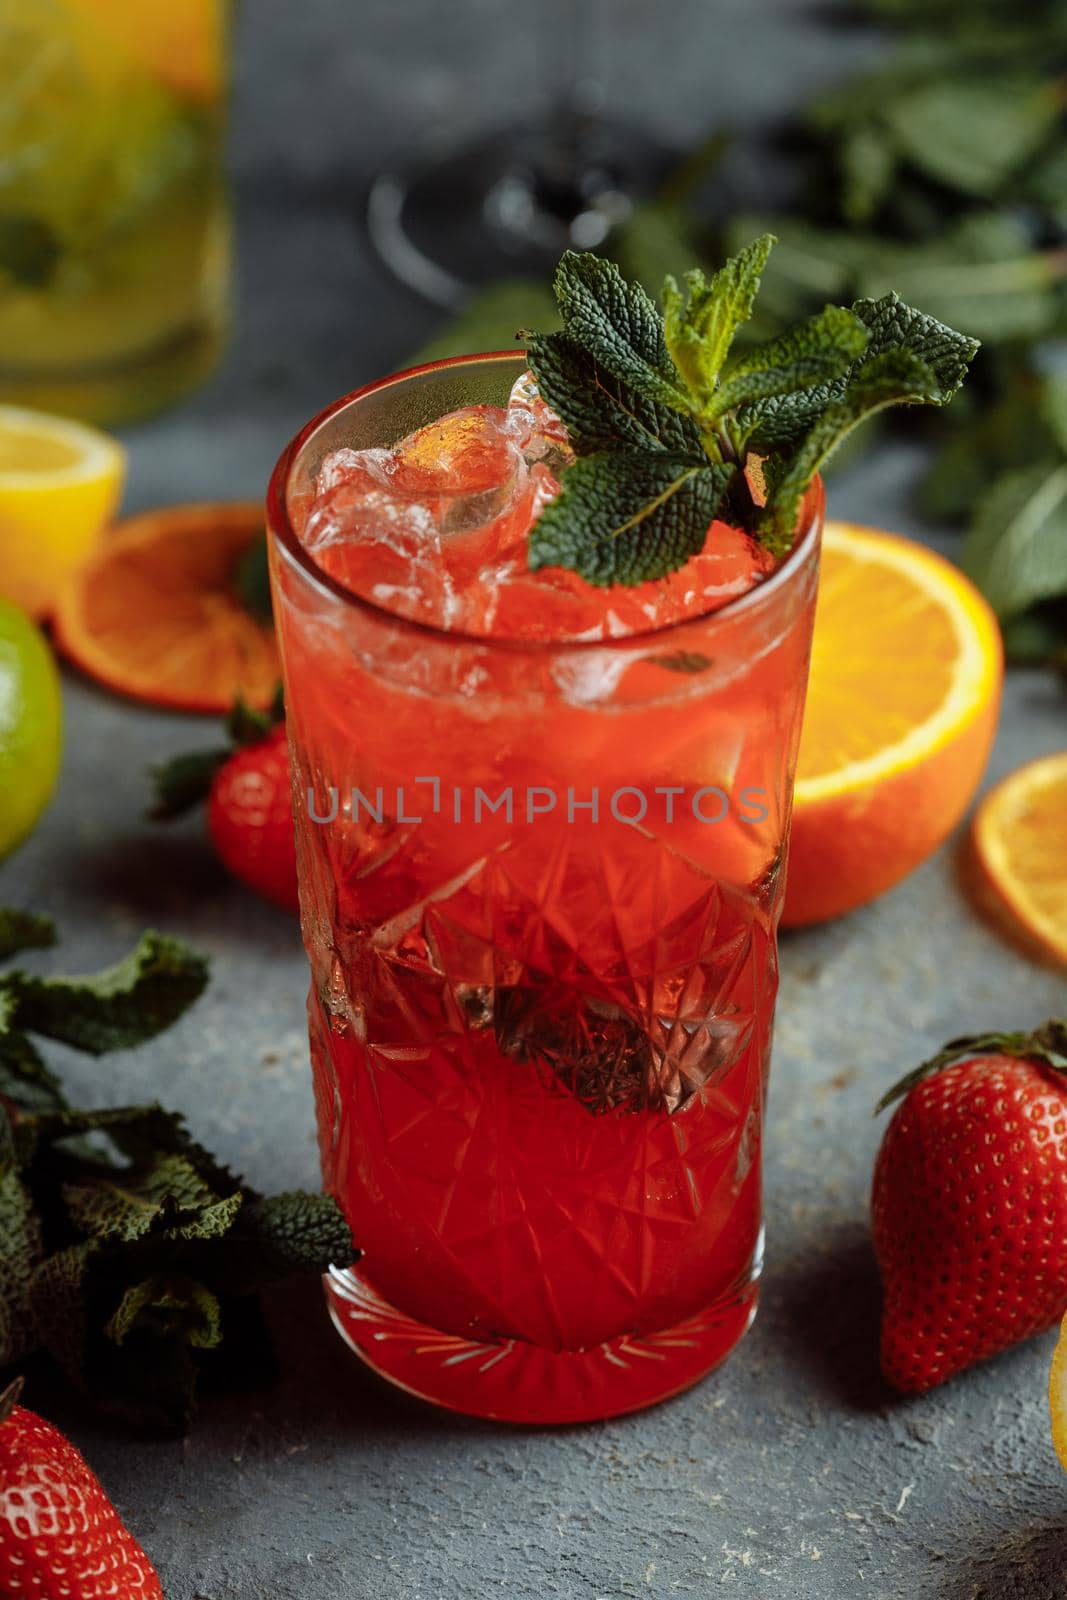 Colorful refreshing drinks for summer, cold strawberry lemonade juice with ice cubes in the glasses garnished with sliced fresh lemons by UcheaD